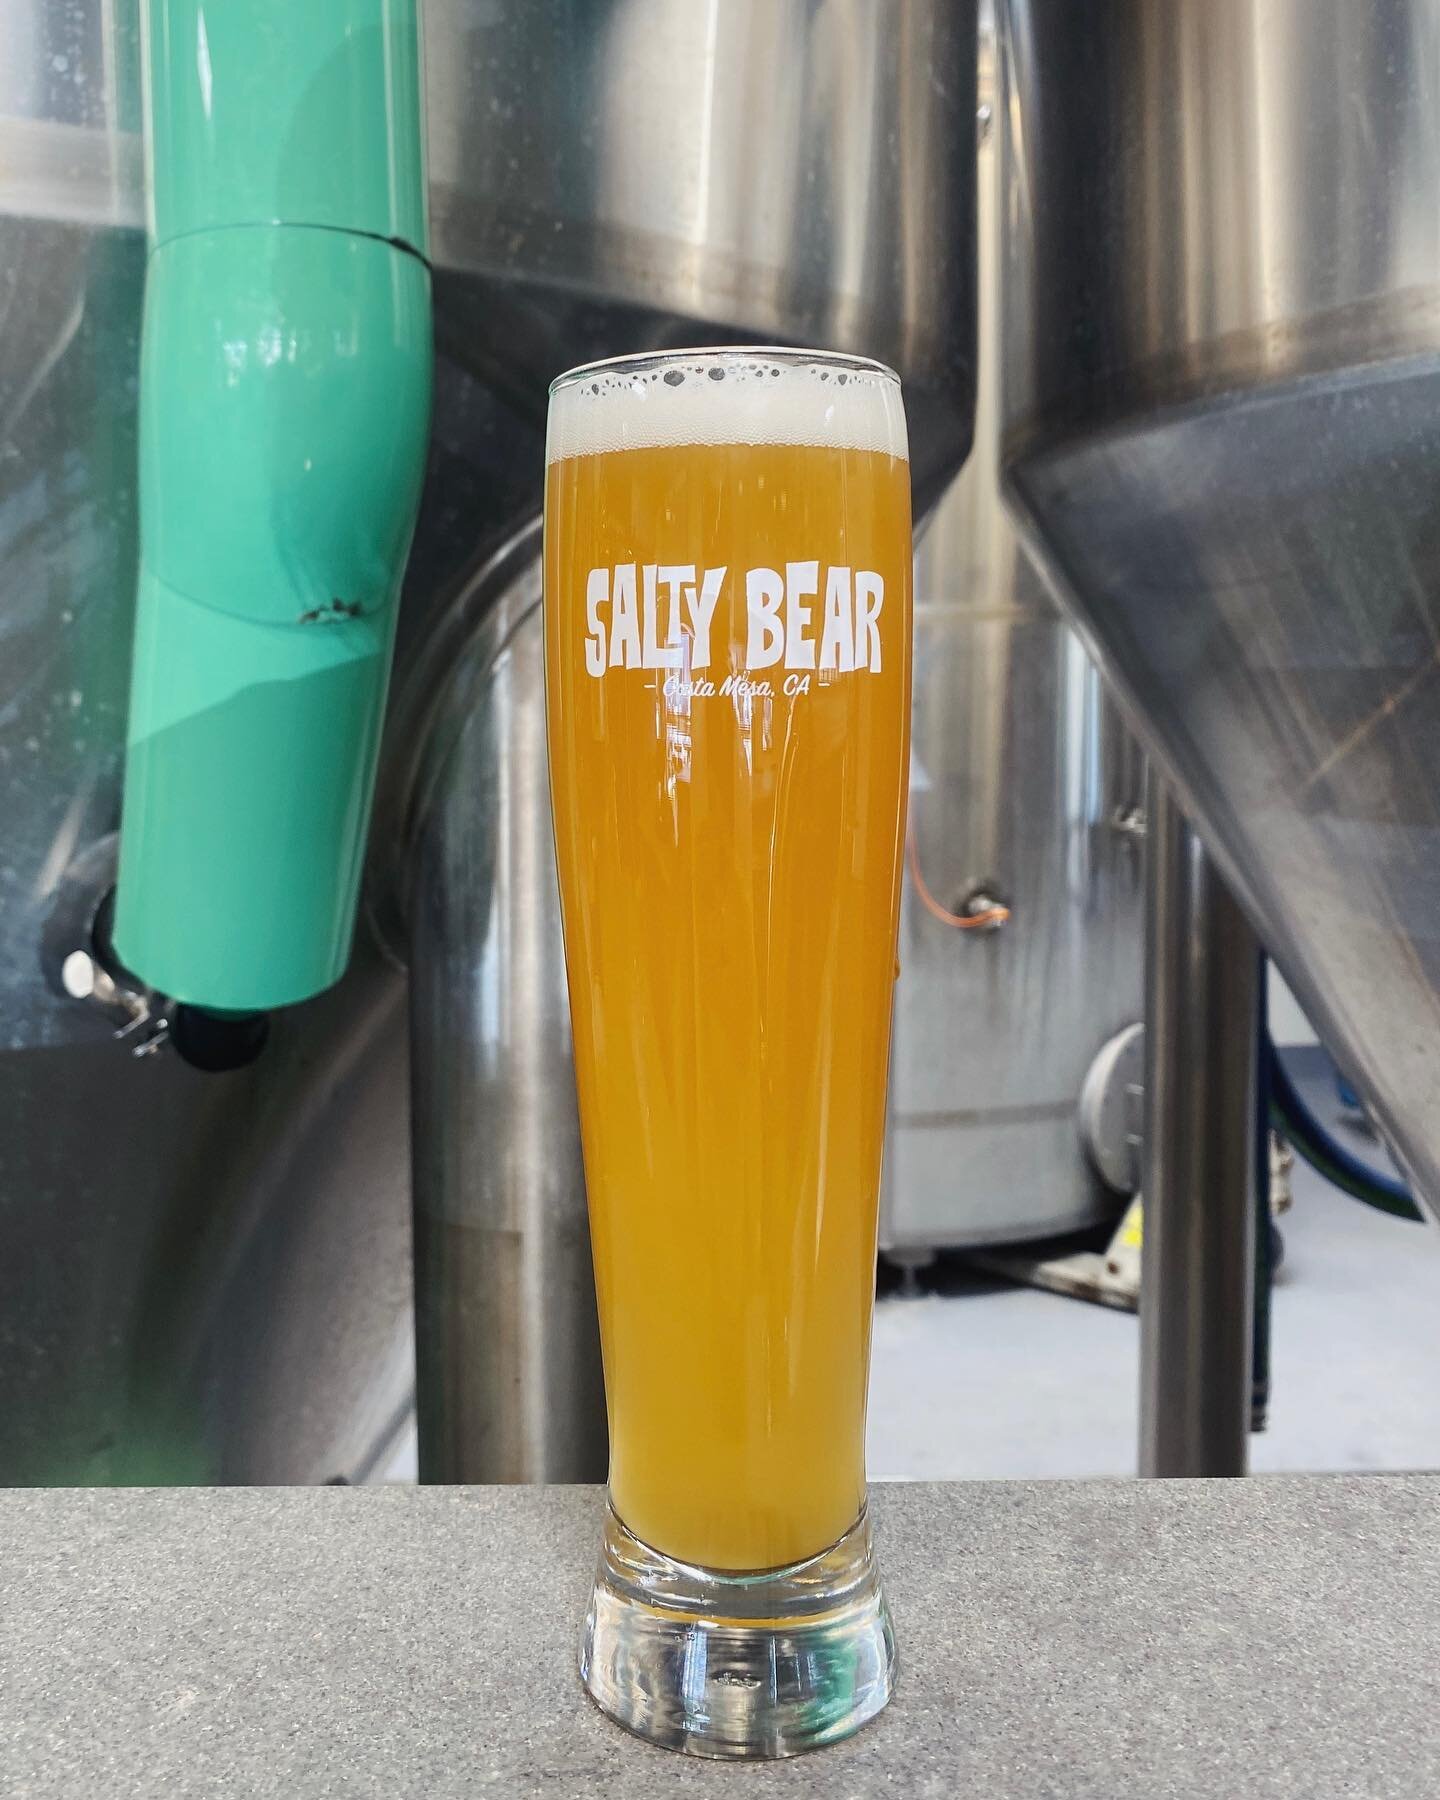 The sun is out and we have a delicious new Hefeweizen on tap. ☀️

The &lsquo;Field Trip&rsquo; Hefe - traditional German Wheat Beer at 5.4% 

Saturday we have @jollyburgeroc + @magicalfork playing on the patio 3-6PM. 

🍻